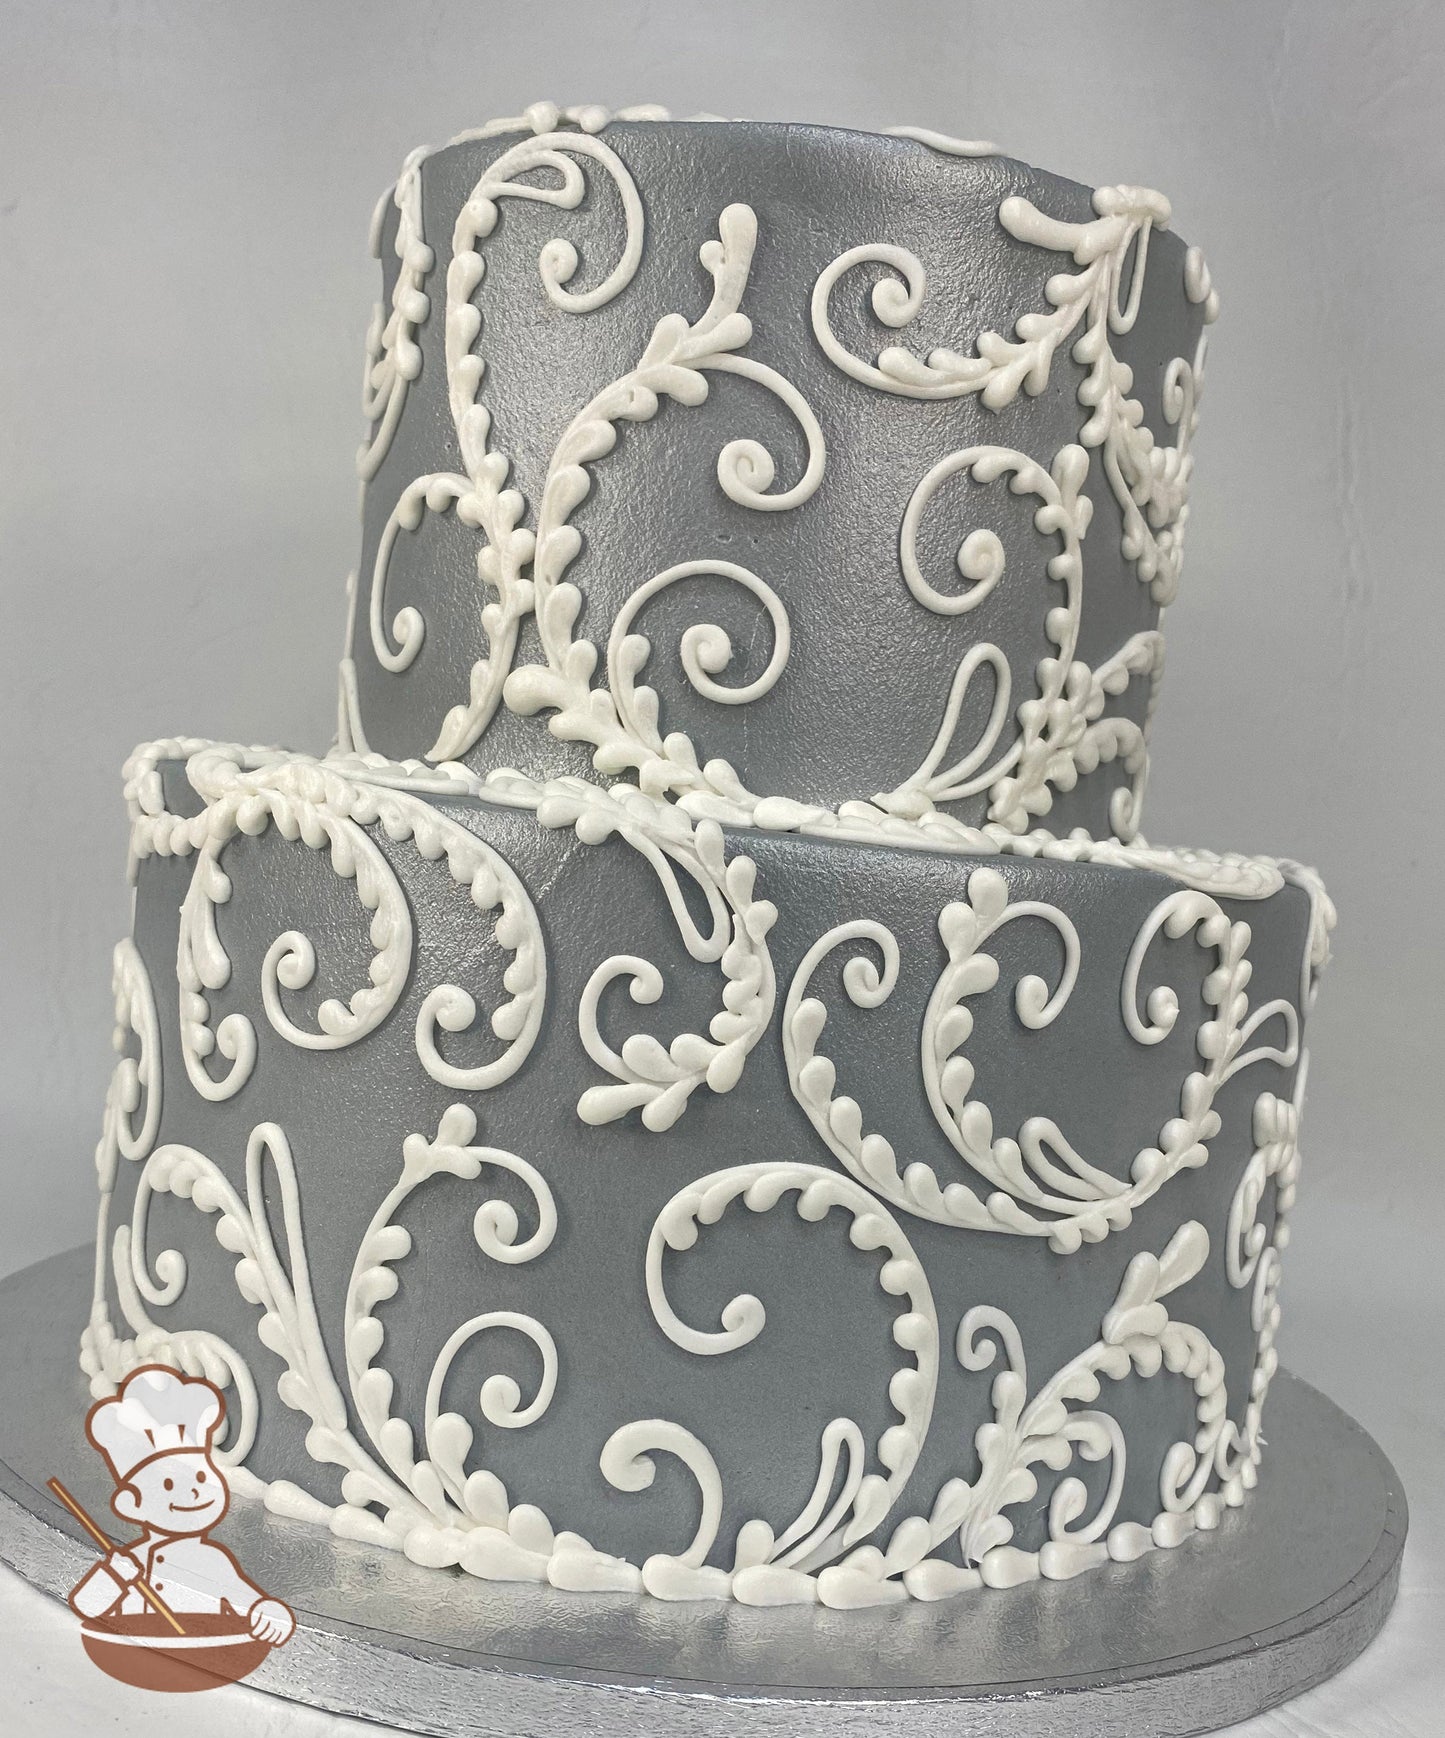 2-tier round cake with gray icing and added shimmer to the cake and white buttercream scrolls all over the cake.